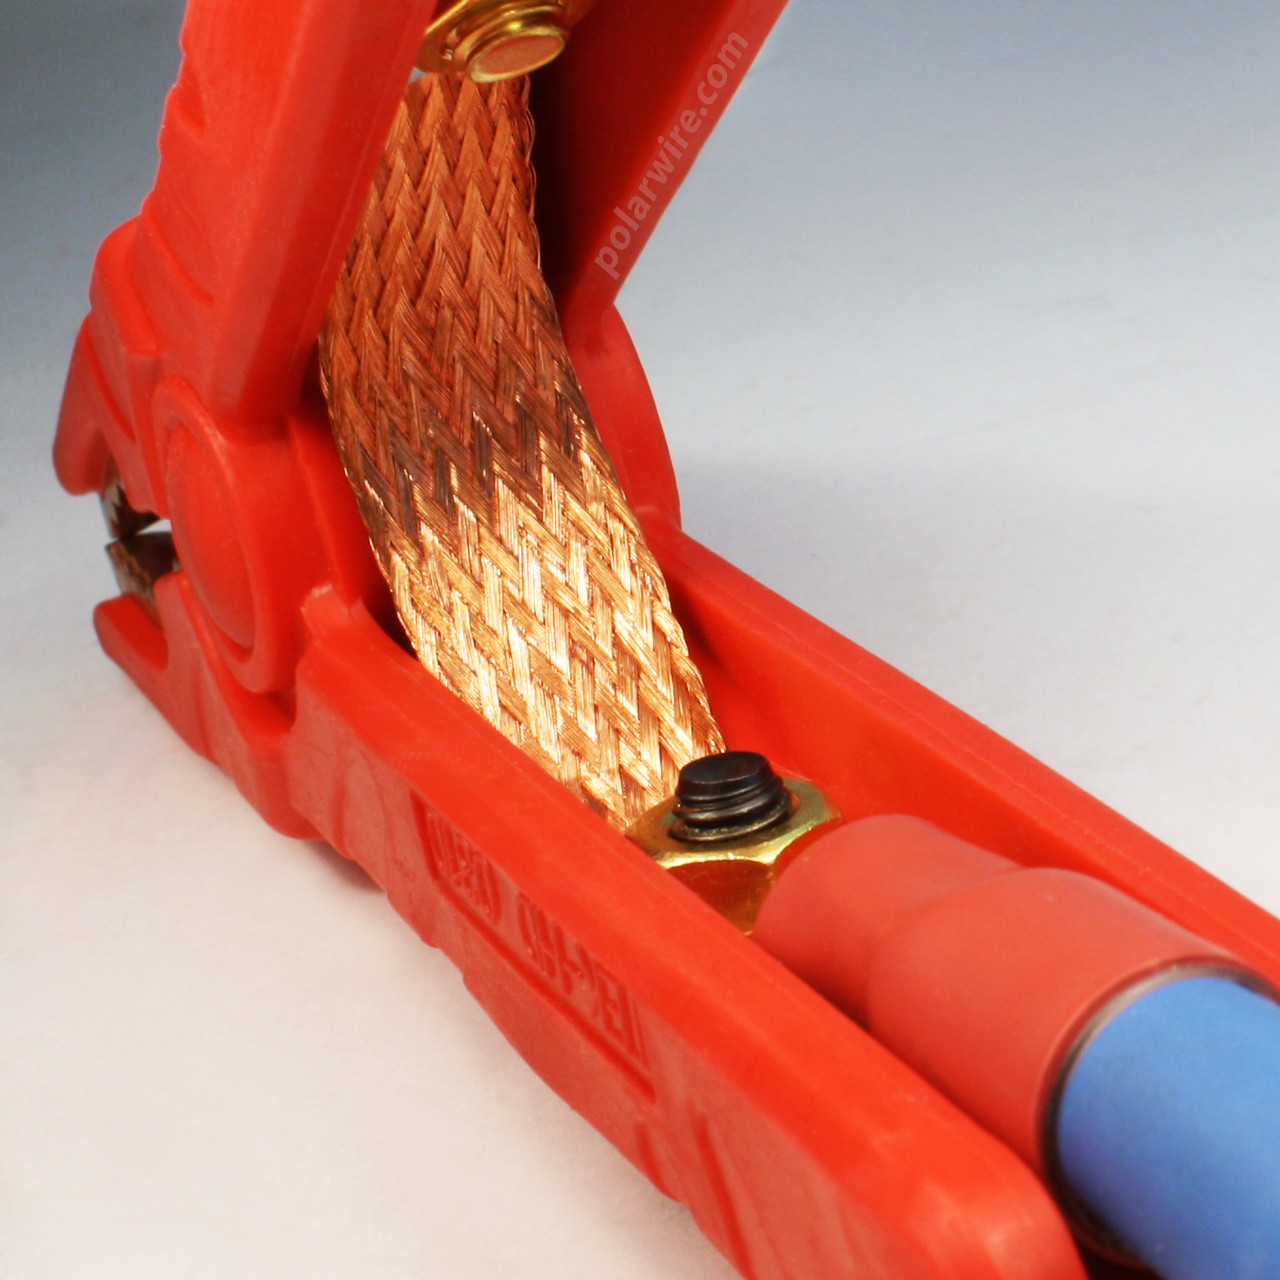 Braided copper bonding strap supplies continuous current to both jaws for highest amperage